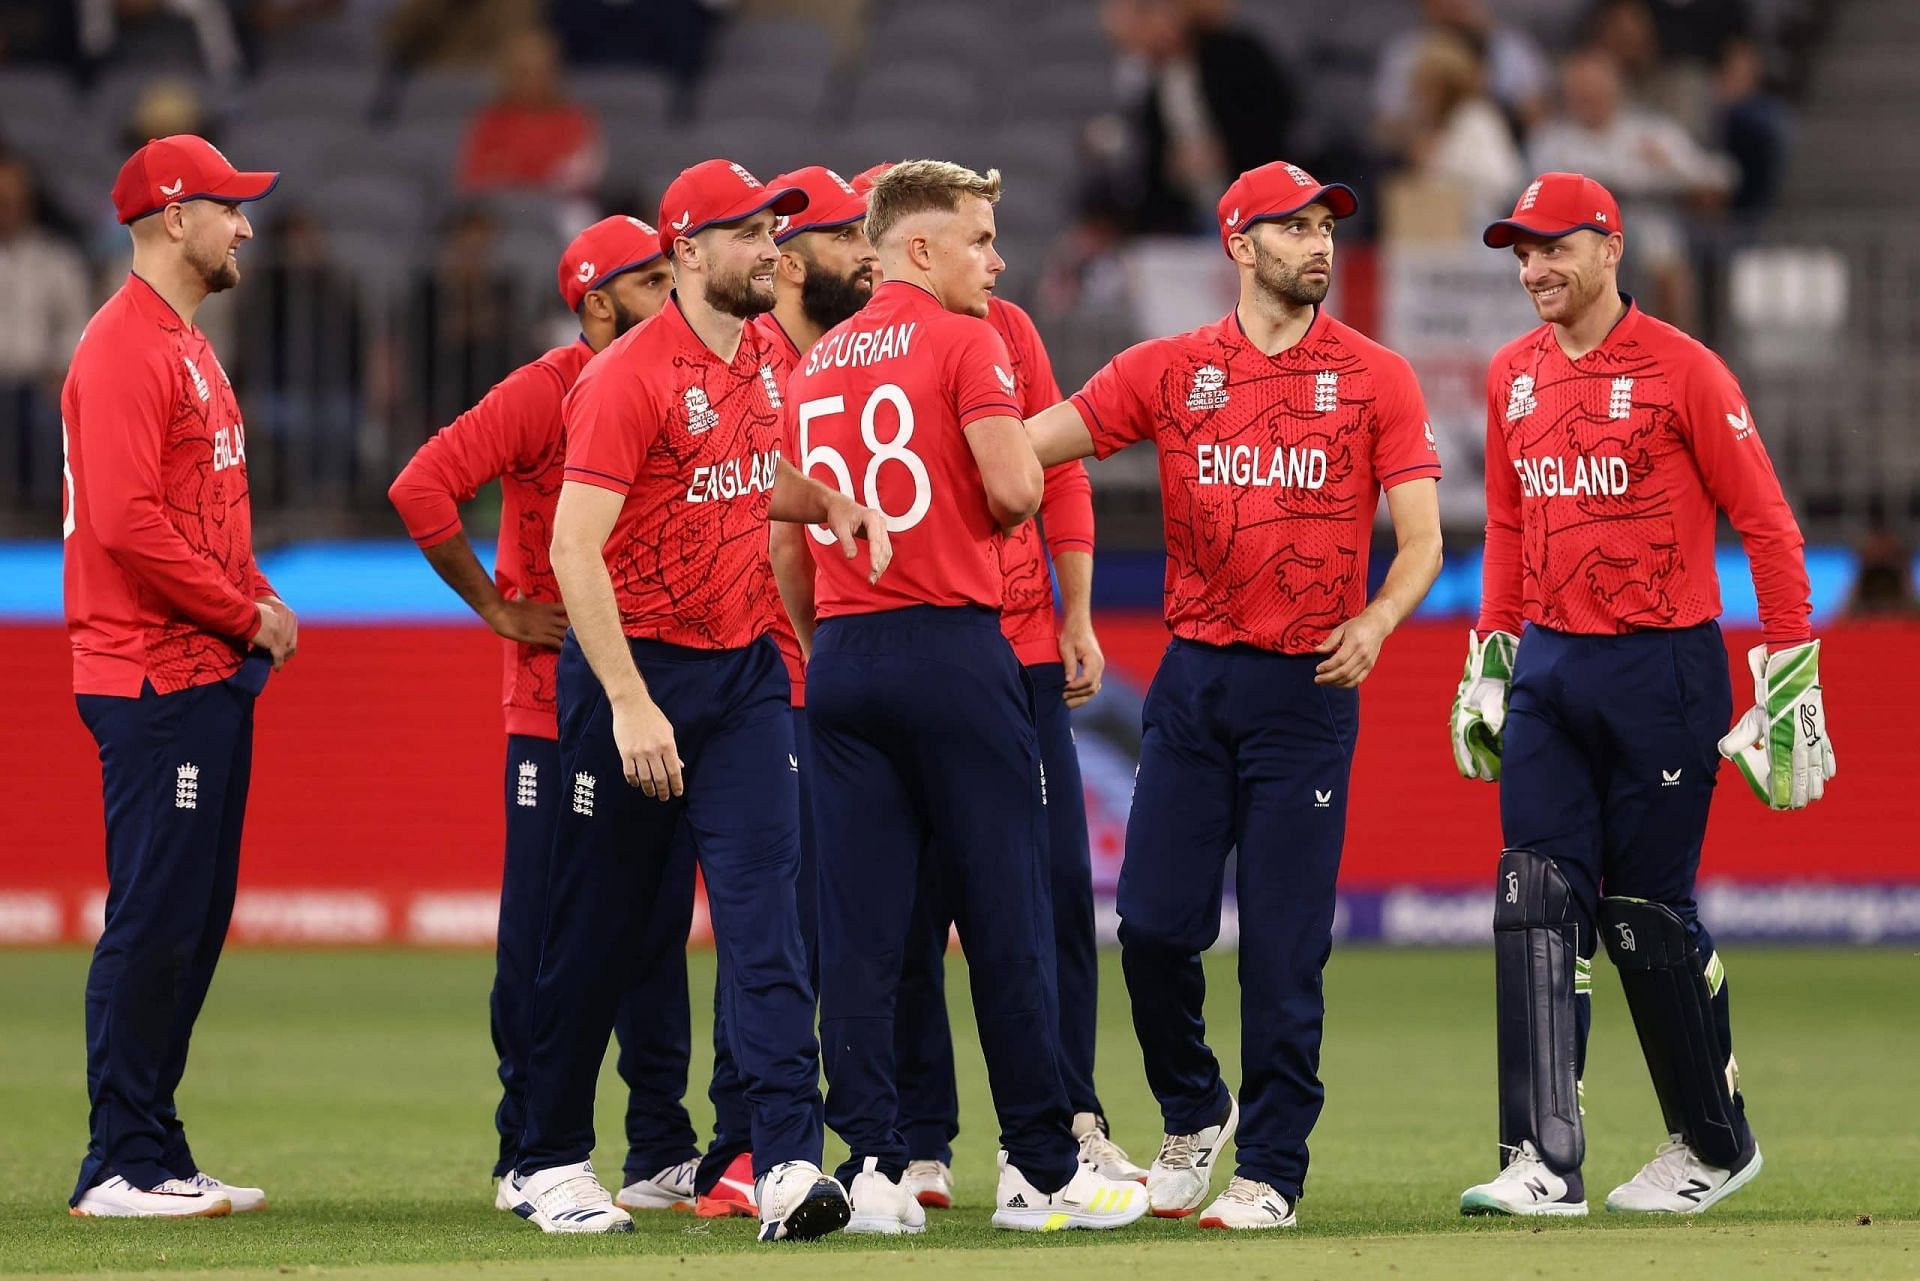 England made a solid start to their T20 WC campaign.